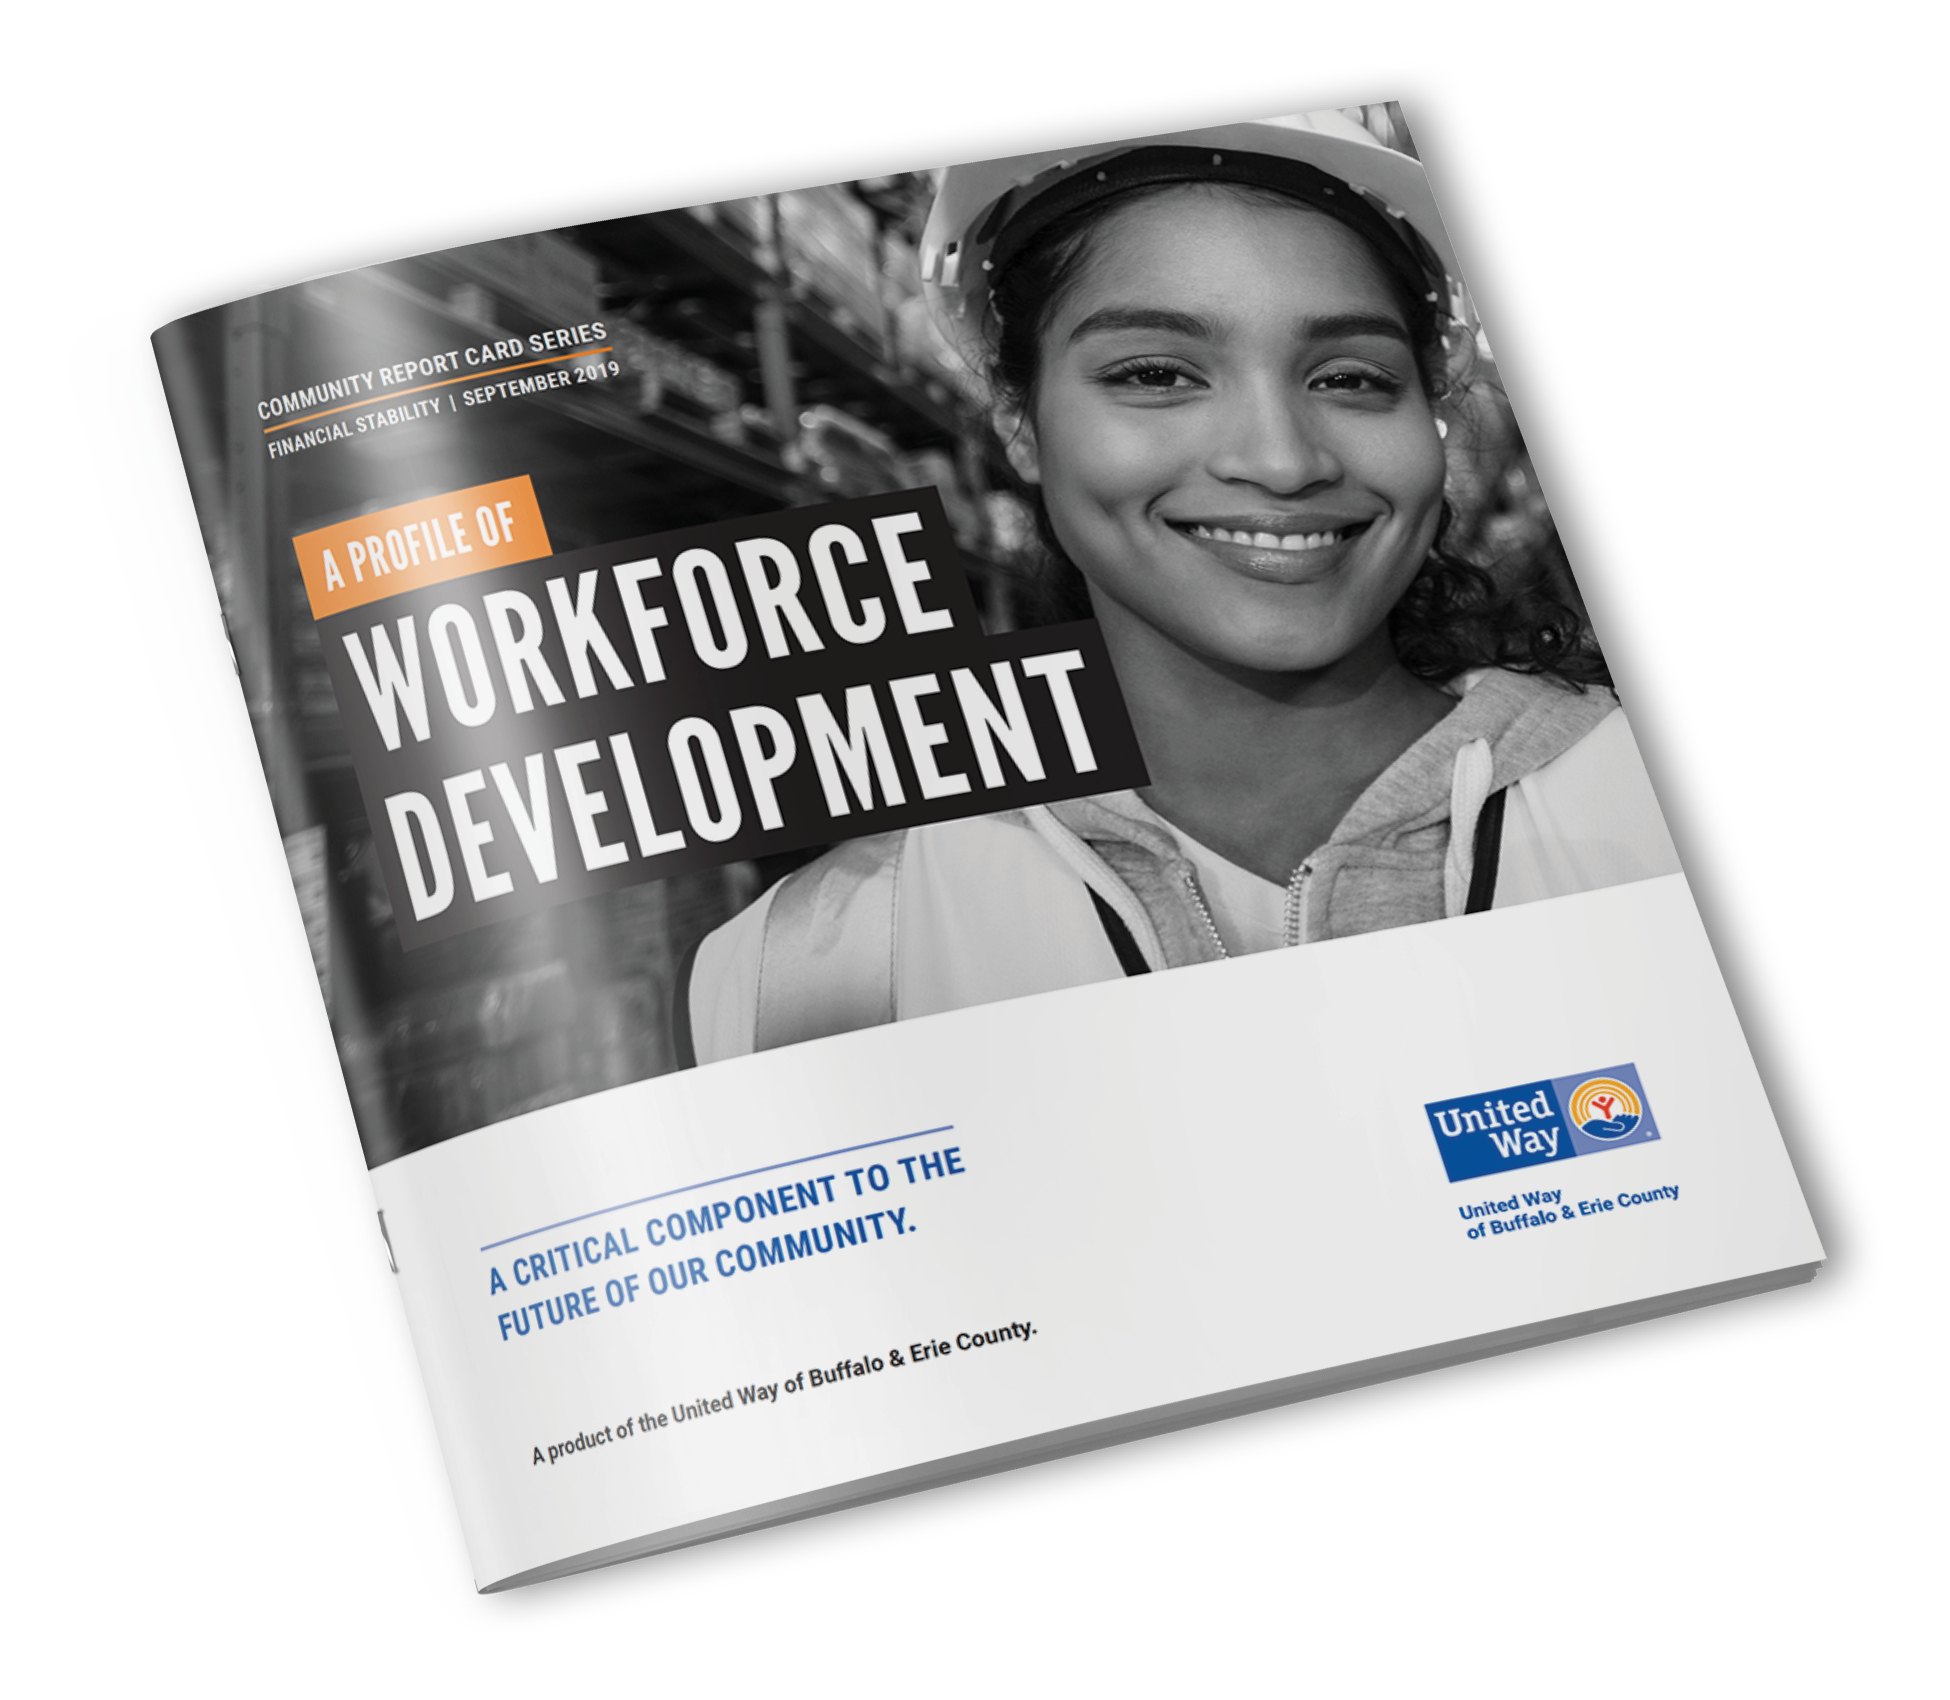 This is a picture of United Way's workforce development information magazine.